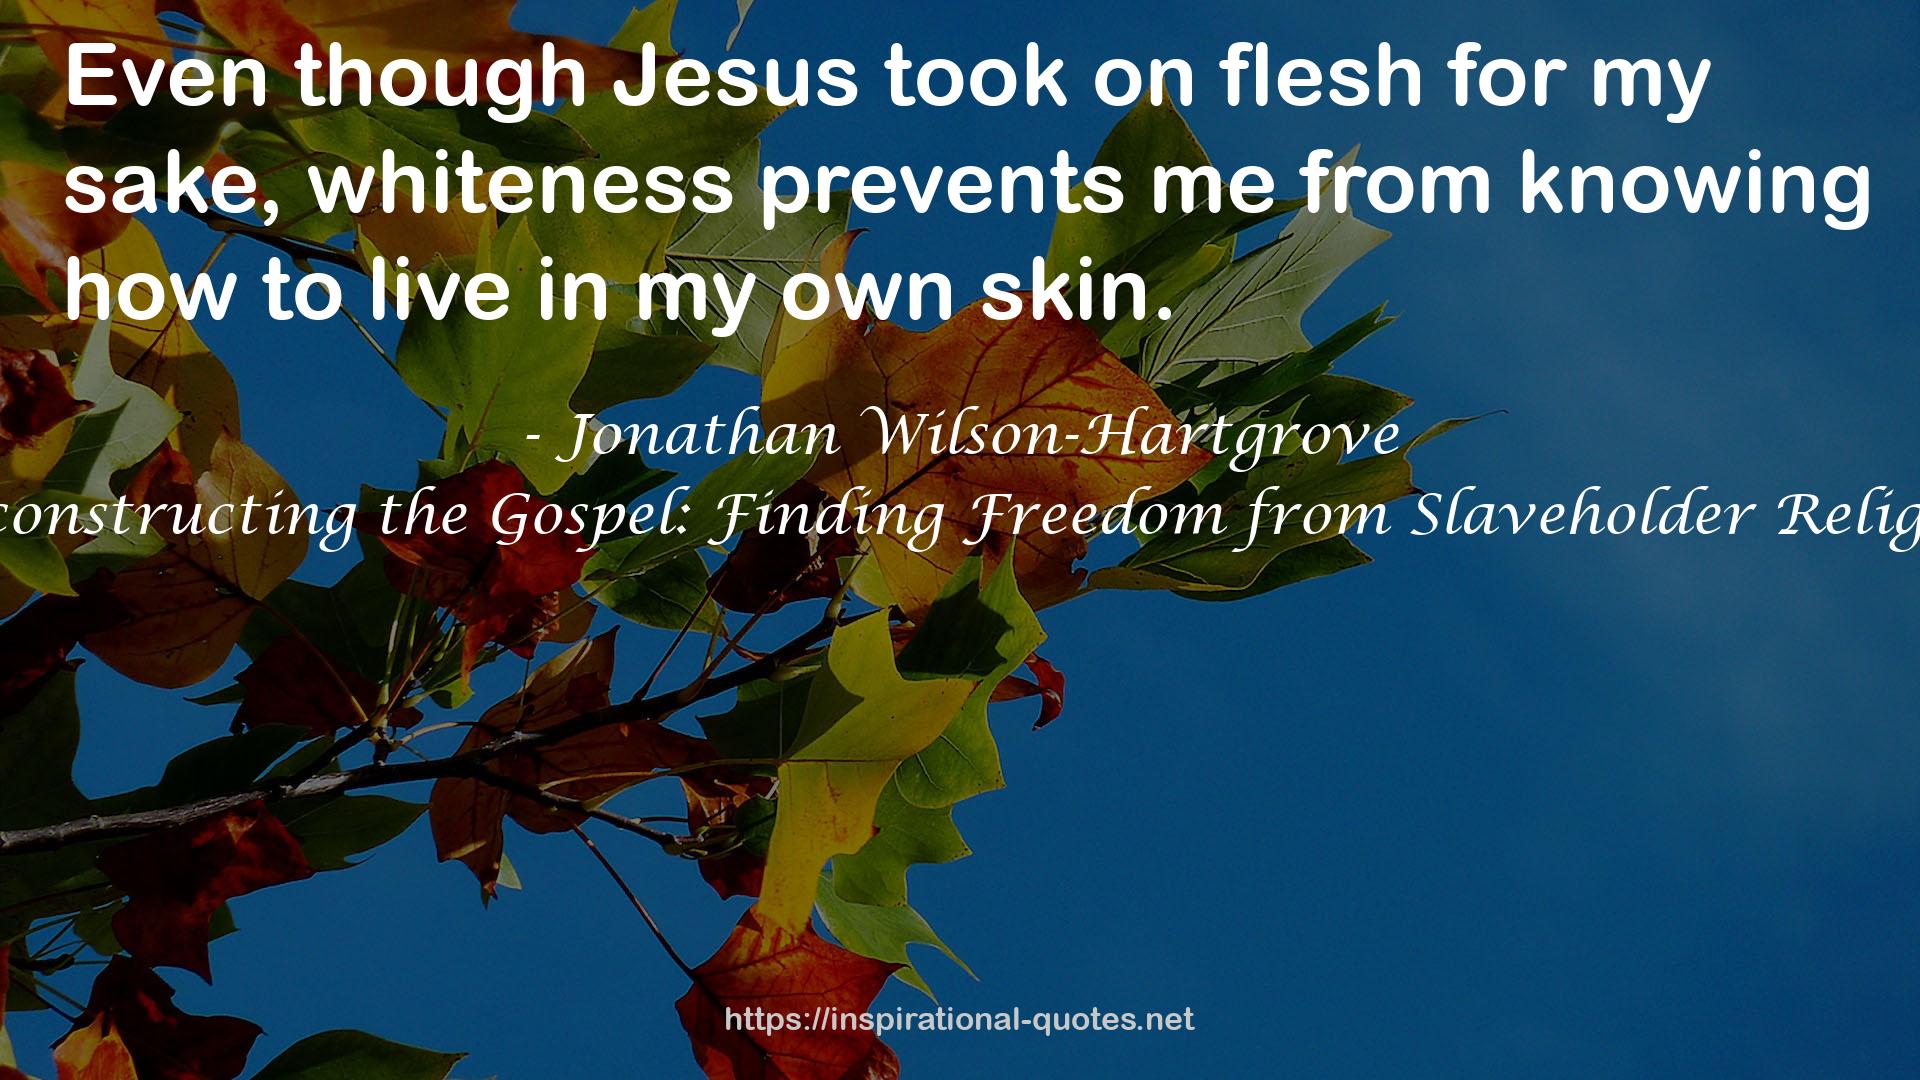 Reconstructing the Gospel: Finding Freedom from Slaveholder Religion QUOTES